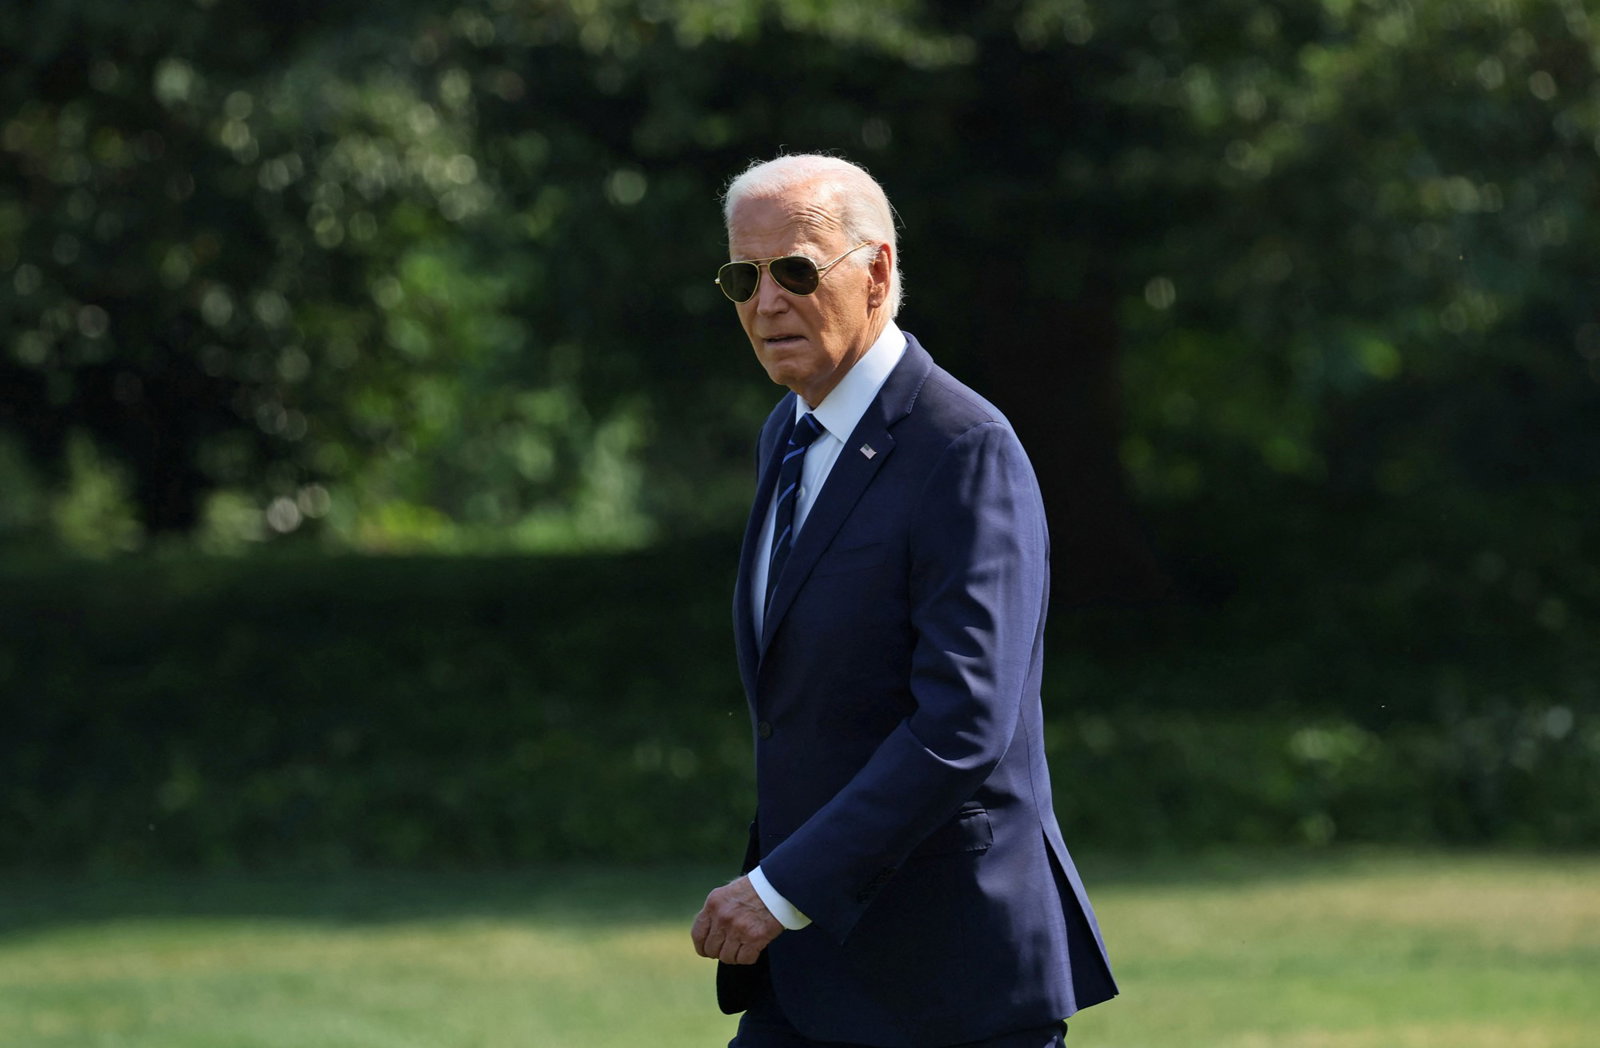 US president Joe Biden walks across the South Lawn of the White House, wearing a suit and aviator sunglasses